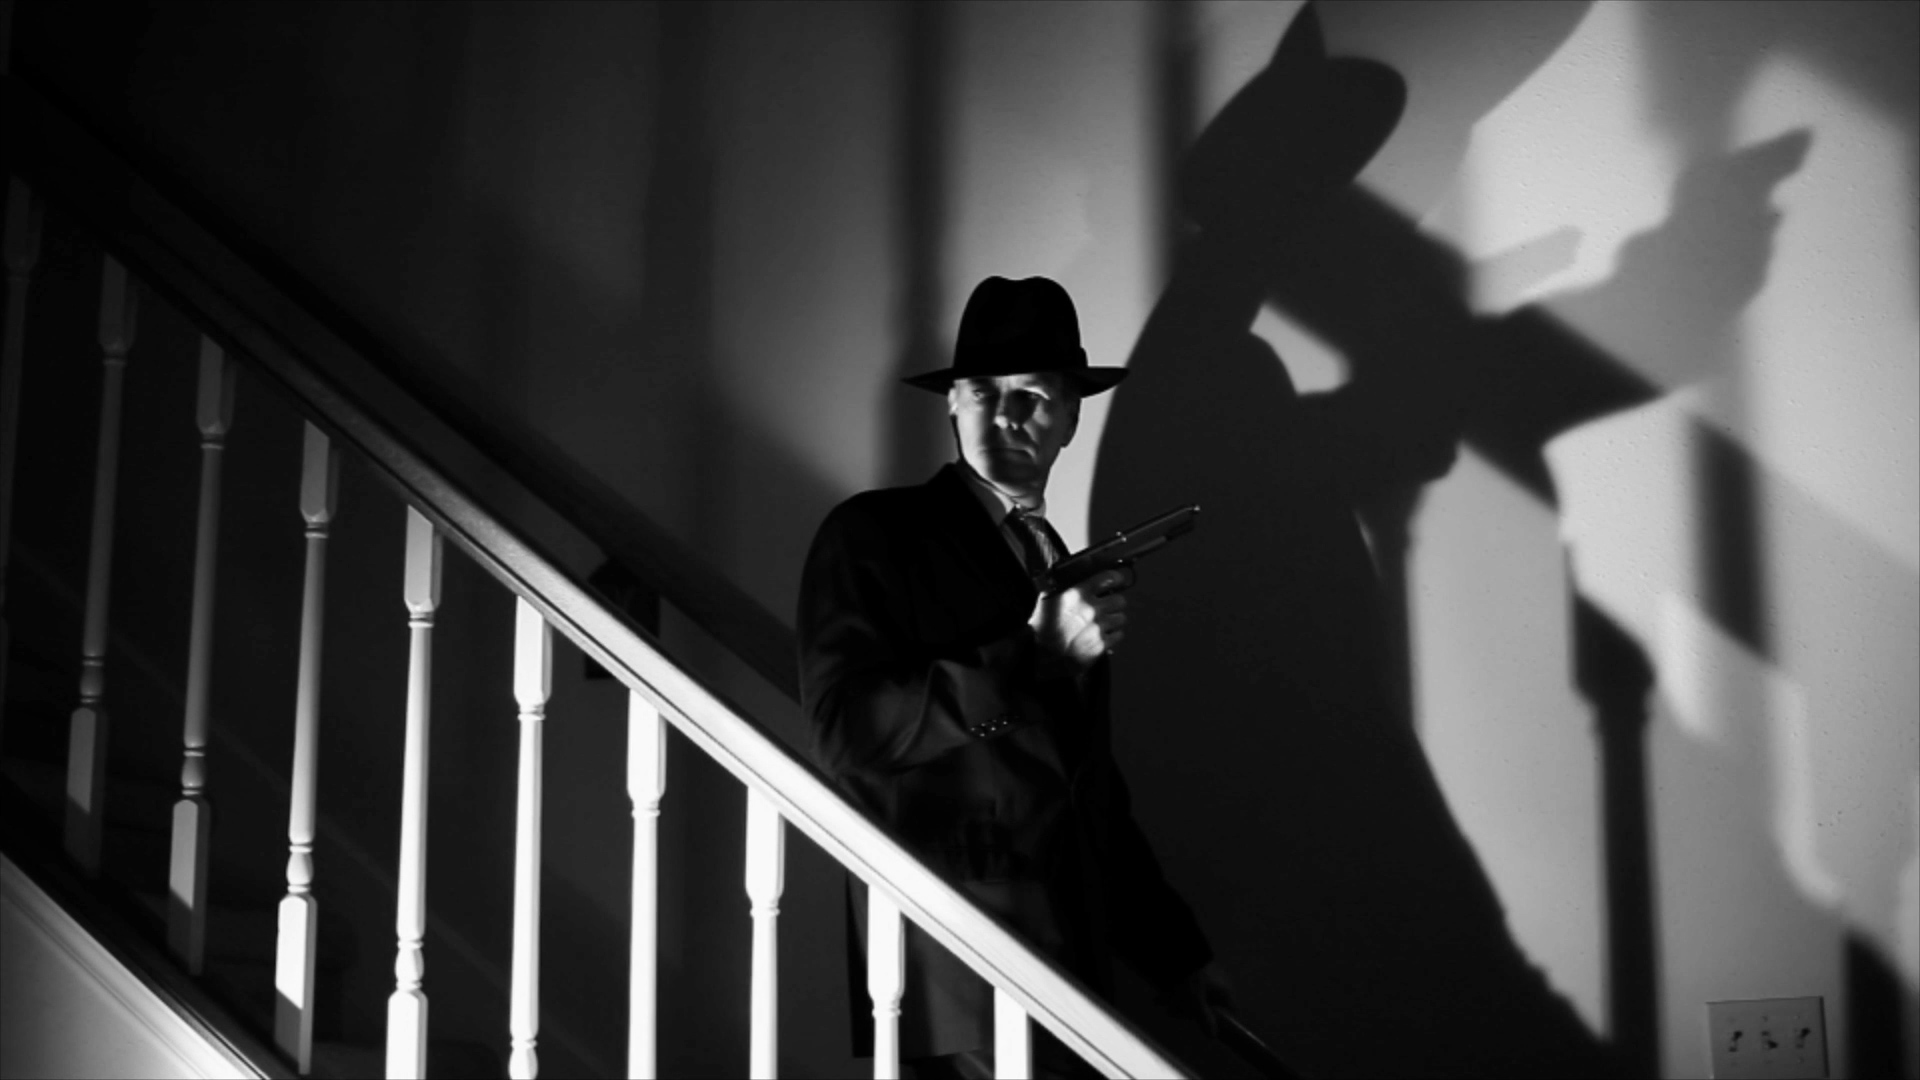 A man in a hat is standing on the stairs.